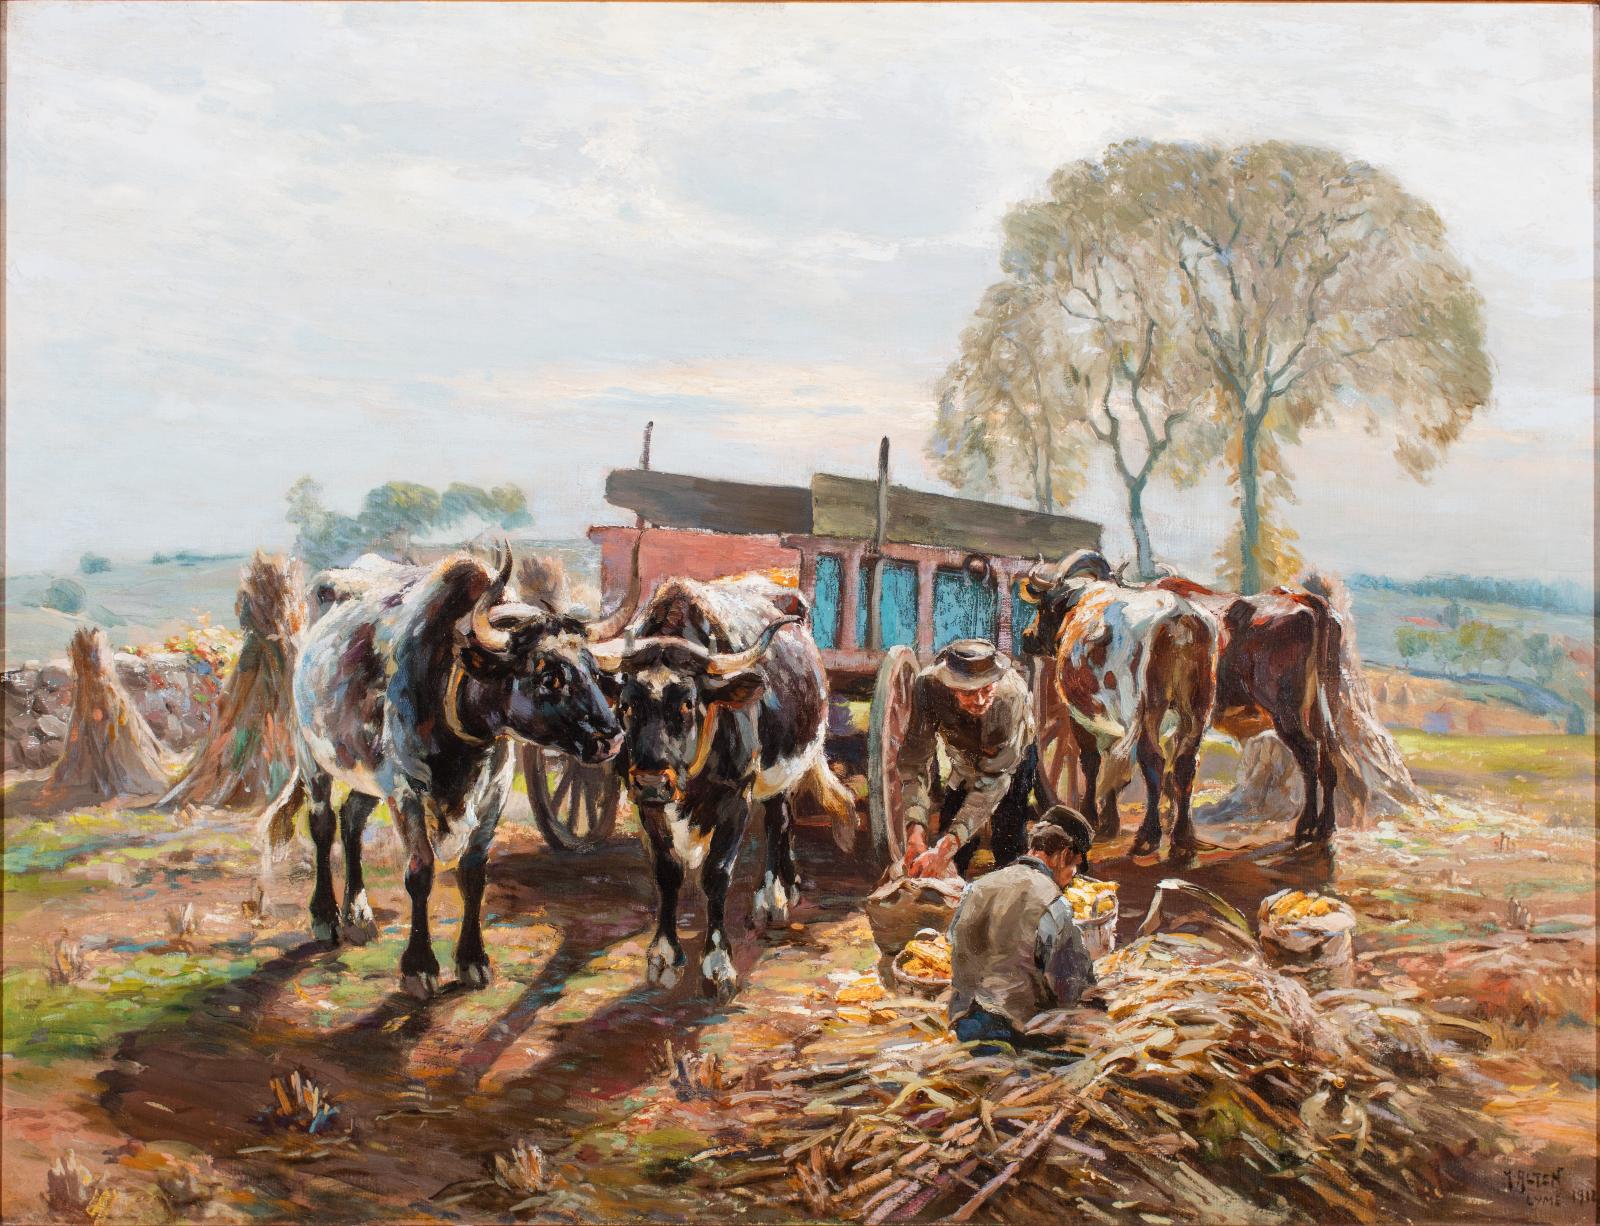 Oxen and farmers gathering corn using a red cart.